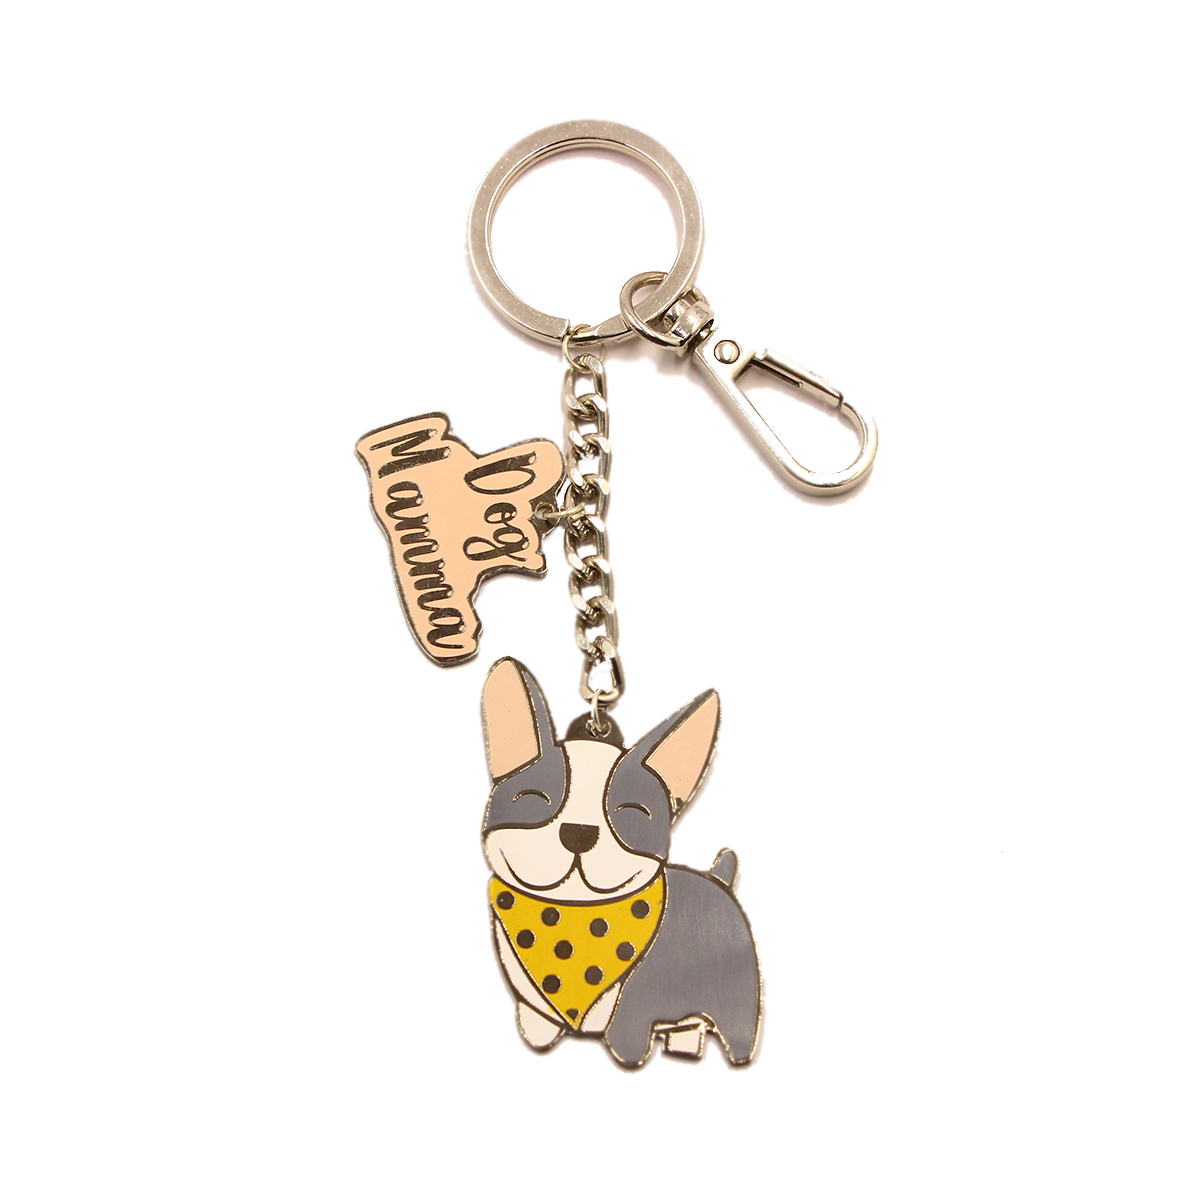 custom keychains, metal name keychains logo keychains and engraved keychains from the best keychains makers in Delhi India that provides global shipping